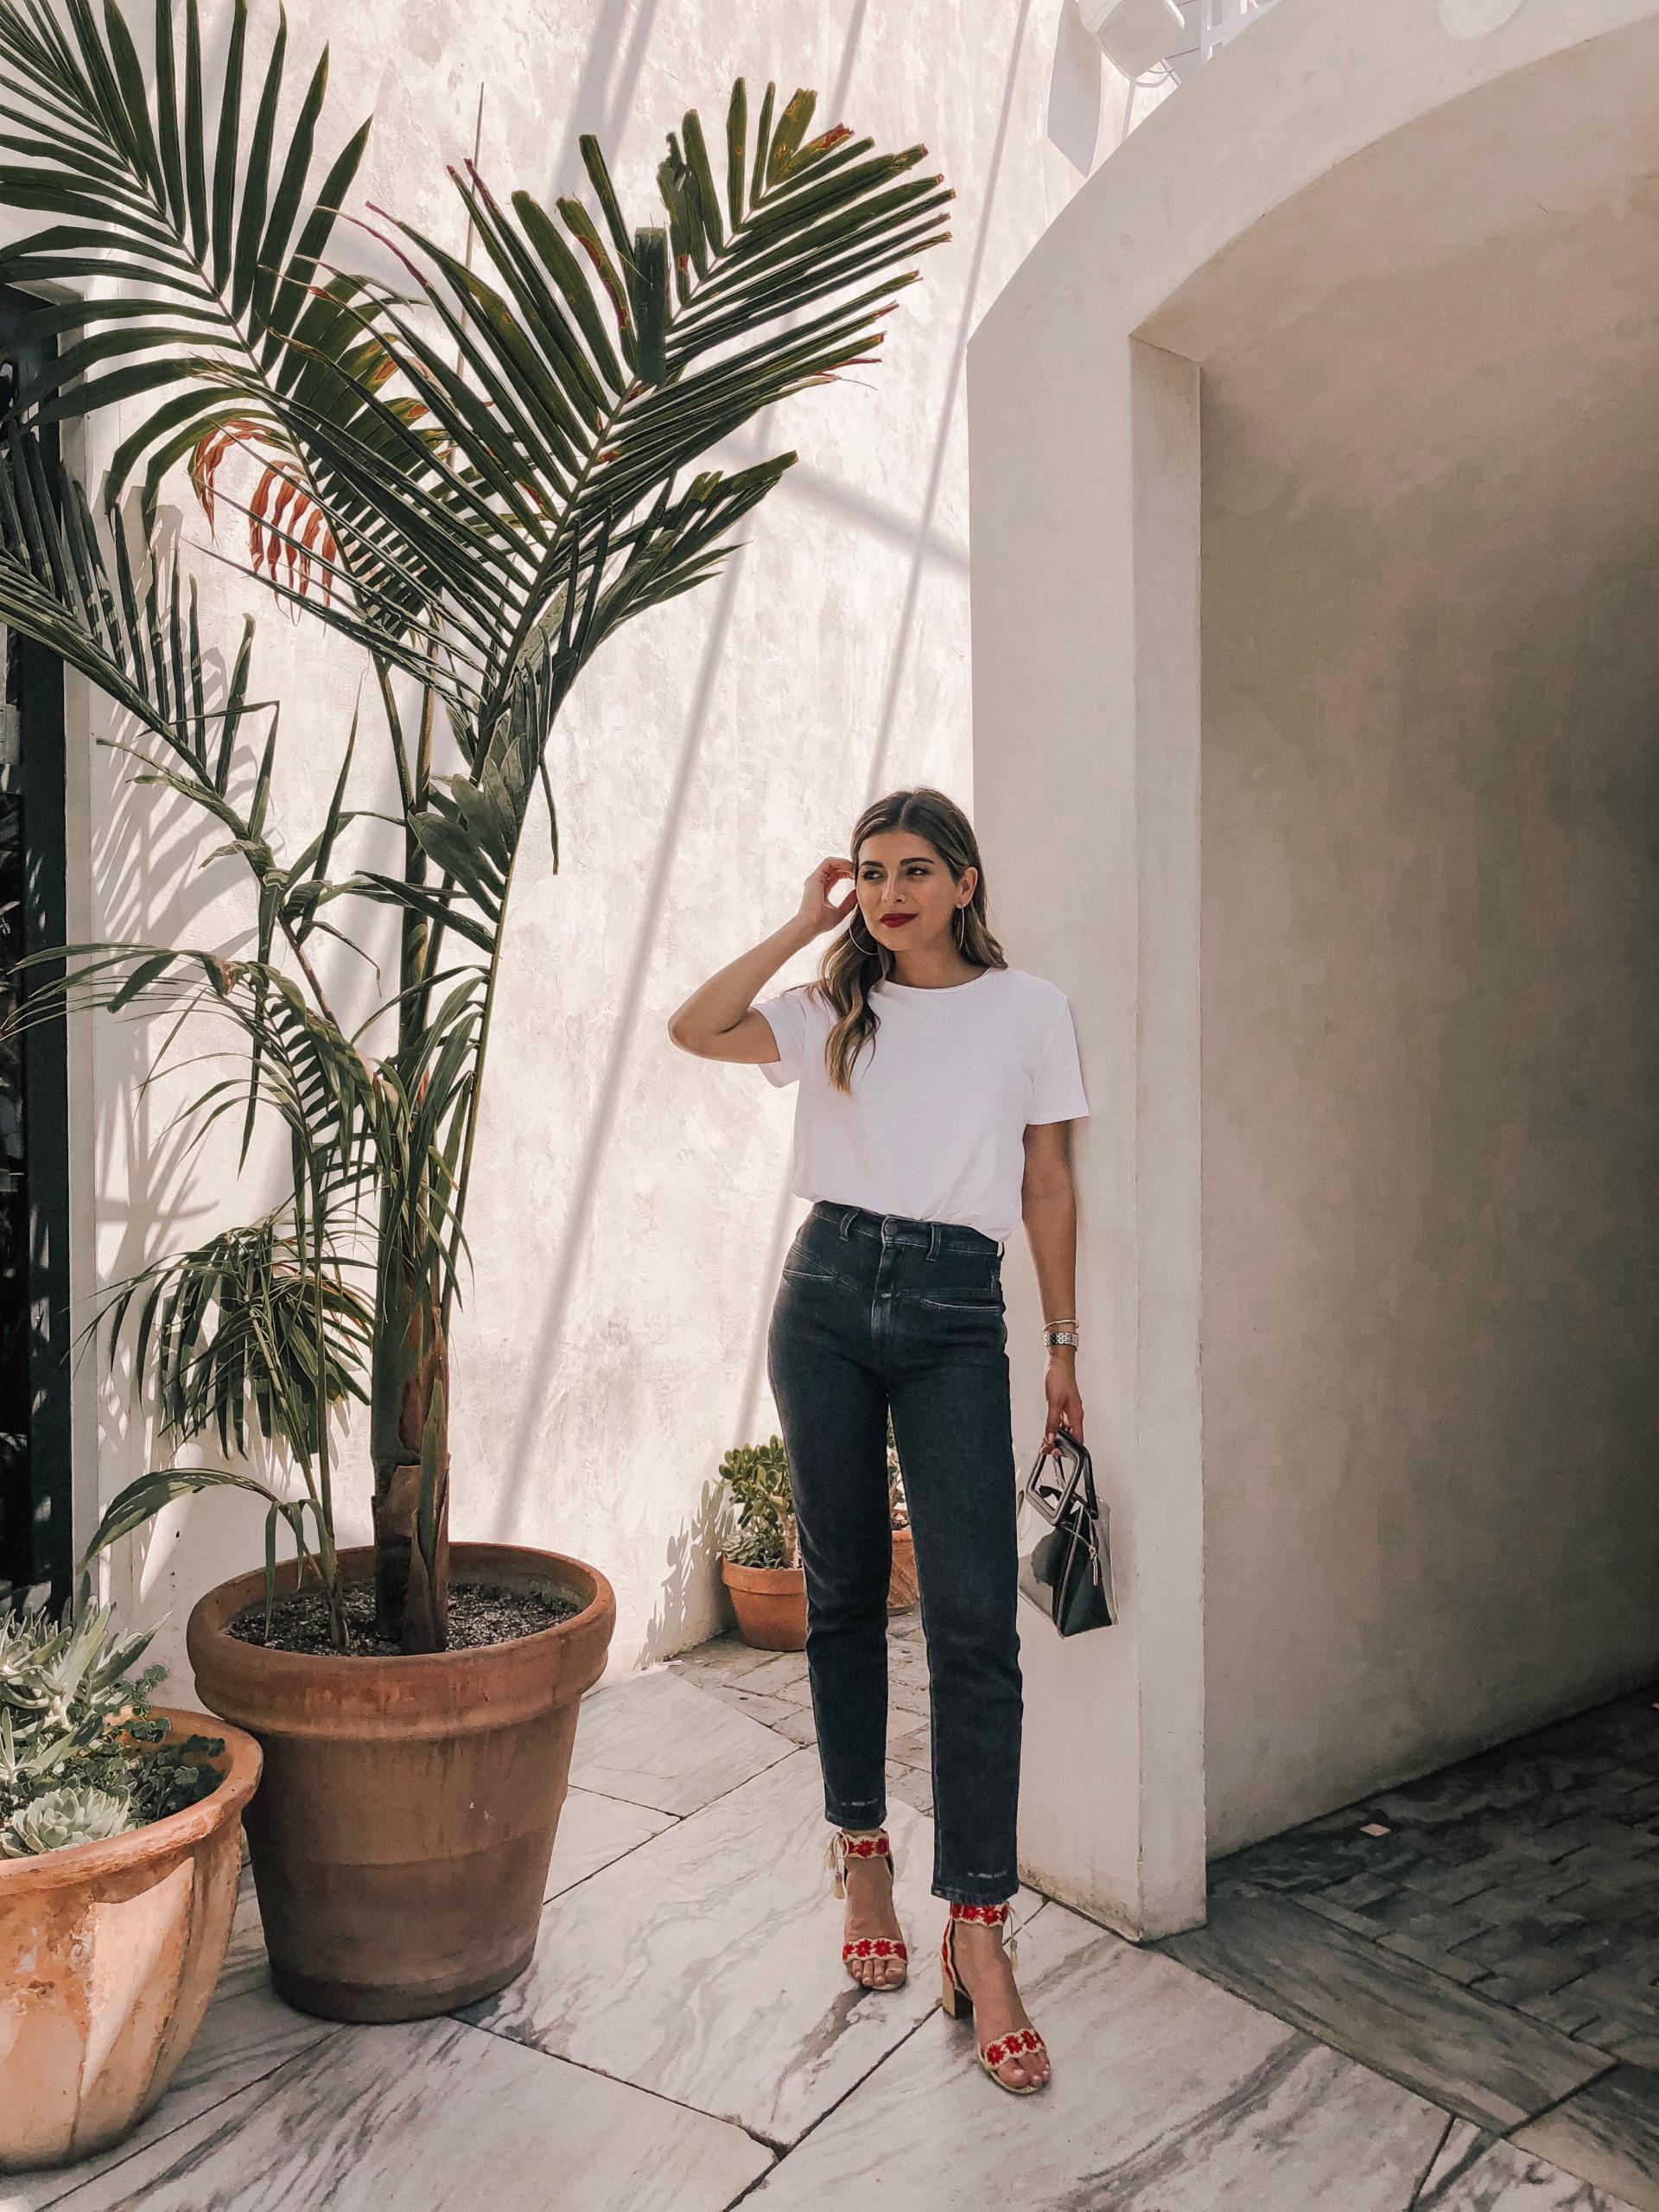 3 Tips for Styling a Basic White Tee - The Girl from Panama